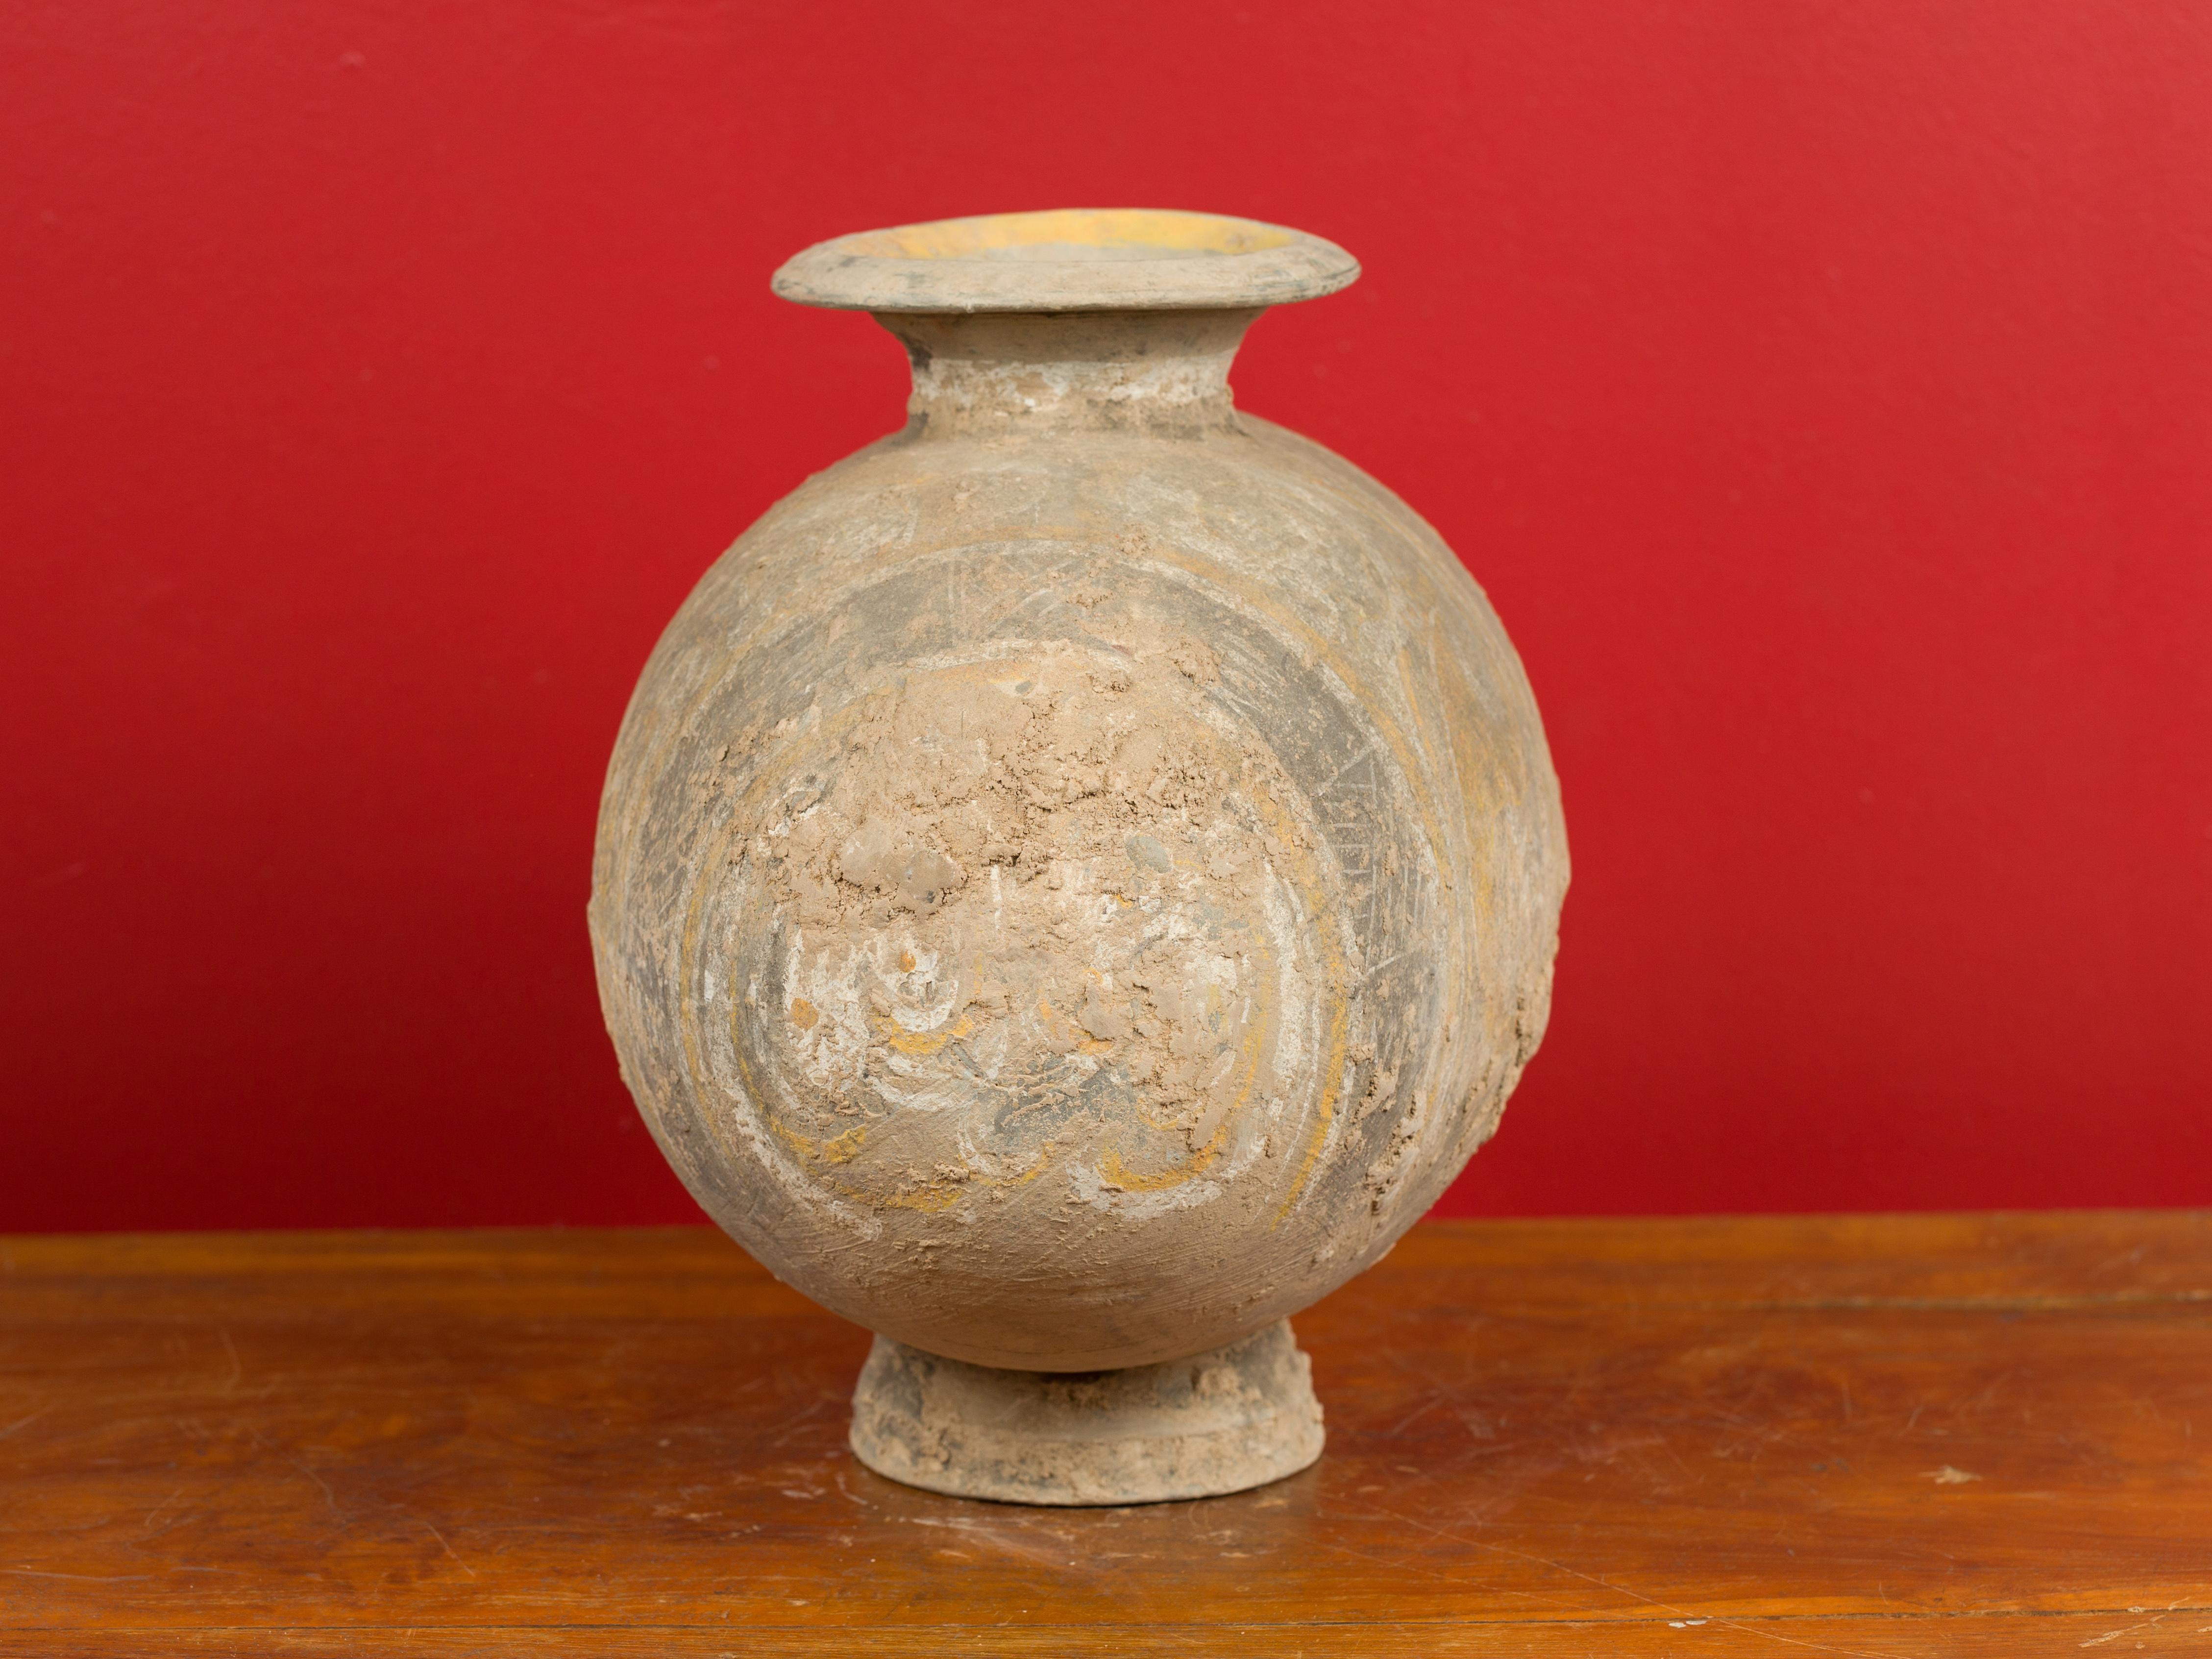 206 BC-200 AD Han Dynasty Antique Terracotta Silk Cocoon Jar with Original Paint 5